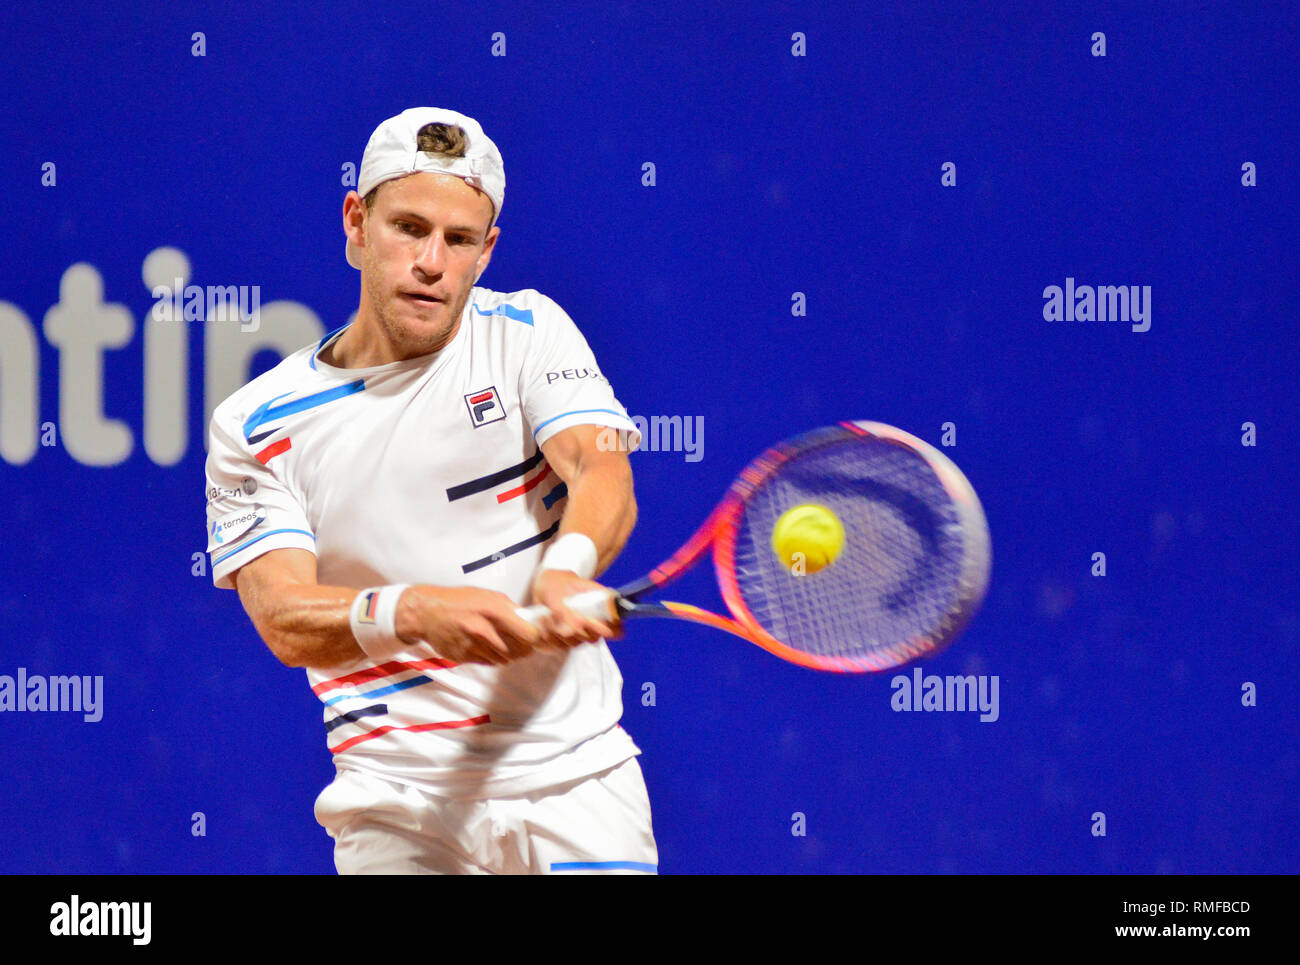 Buenos Aires, Argentina. 14th Feb 2019. Local favourite Diego Schwartzman (Argentina) advances to the next round of the Argentina Open, an ATP 250 tennis tournament. Credit: Mariano Garcia/Alamy Live News Stock Photo